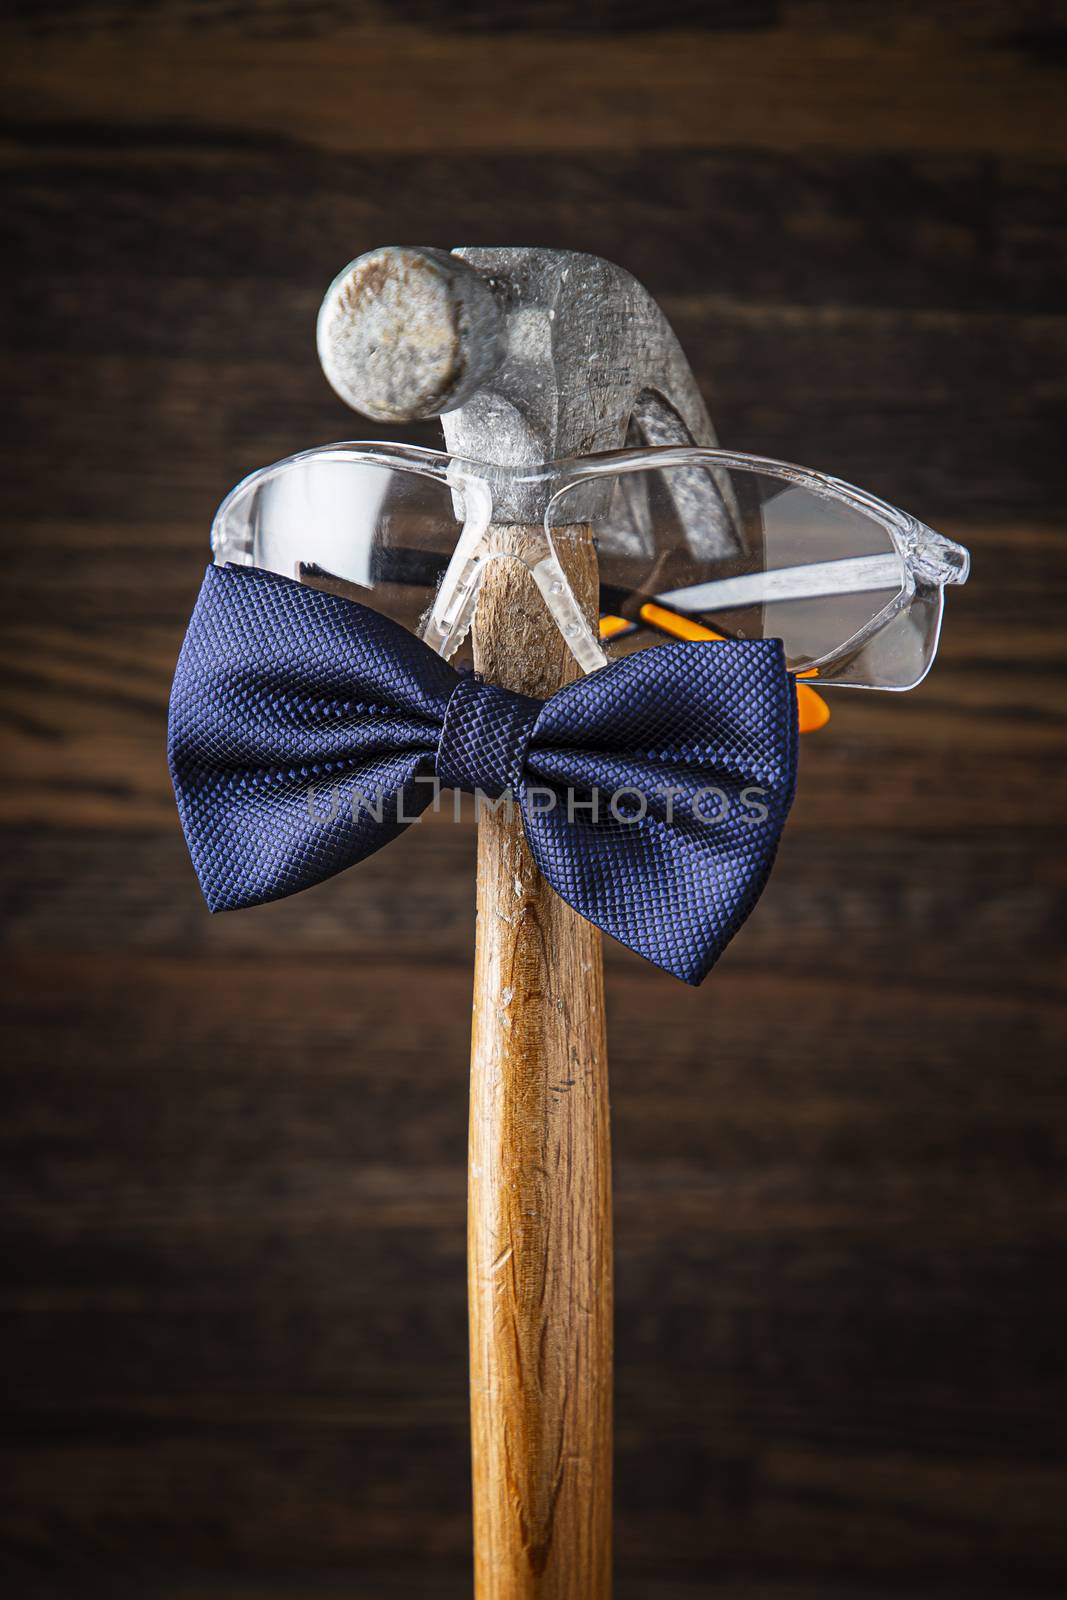 Hammer, glasses and bowtie by mypstudio